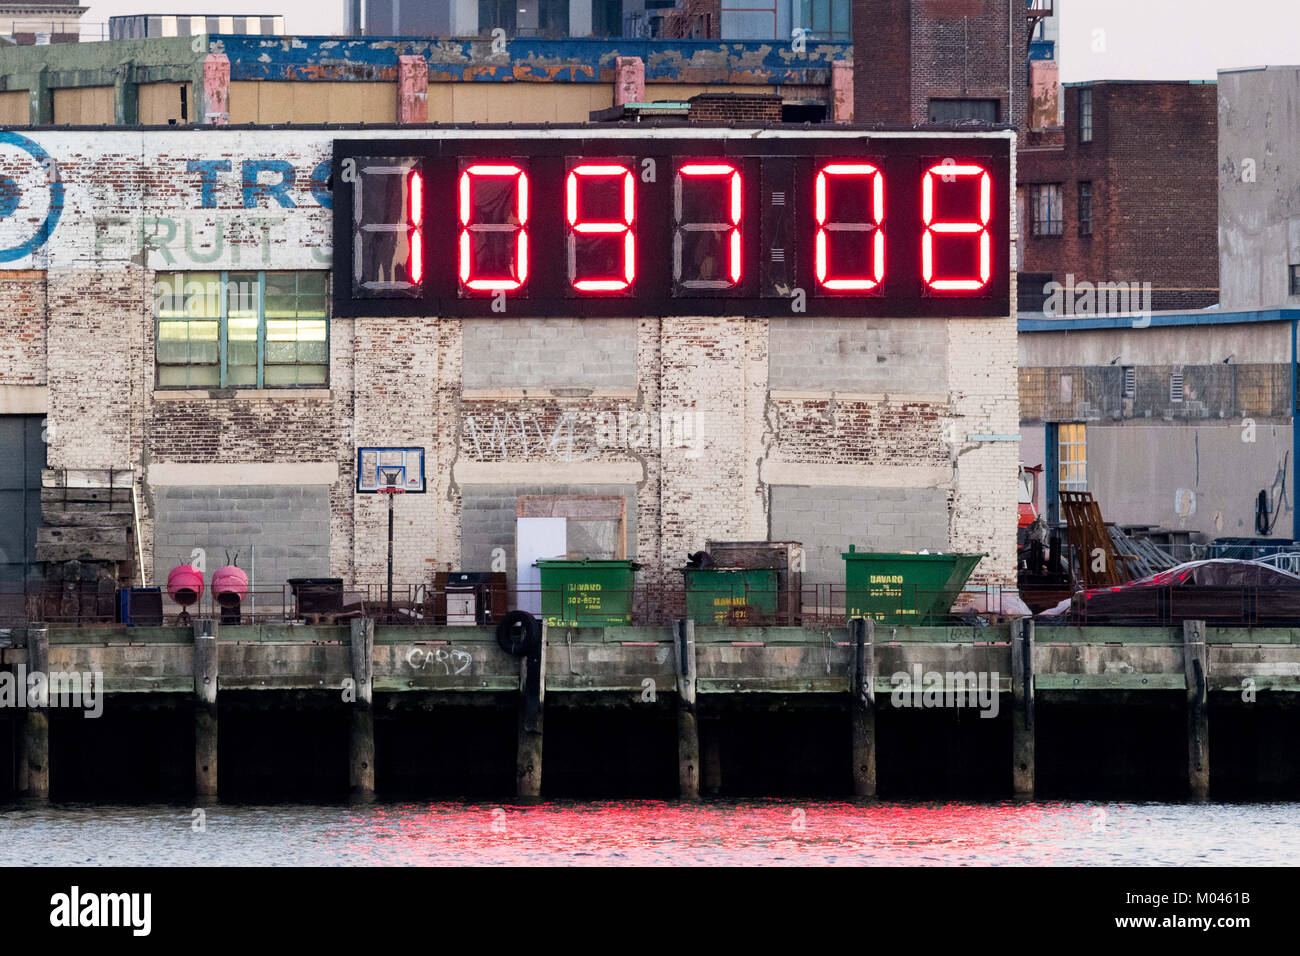 Queens, NY, USA. 18th Jan, 2018. A Very large digital countdown clock showing the number of days and hours left until the next US presidential inauguration day on January 20, 2021. The clock is located in the Long Island City section of Queens in New York City facing the East River and Manhattan and is easily visible from a large part of the east side of Manhattan. The clock is also known as the ''Trump Countdown Clock''. Photo taken on January 18, 2018 at about 4:50pm which is, as shown in the photo, 1,097 days and 8 hours until the next US presidential inauguration day. (Credit Stock Photo